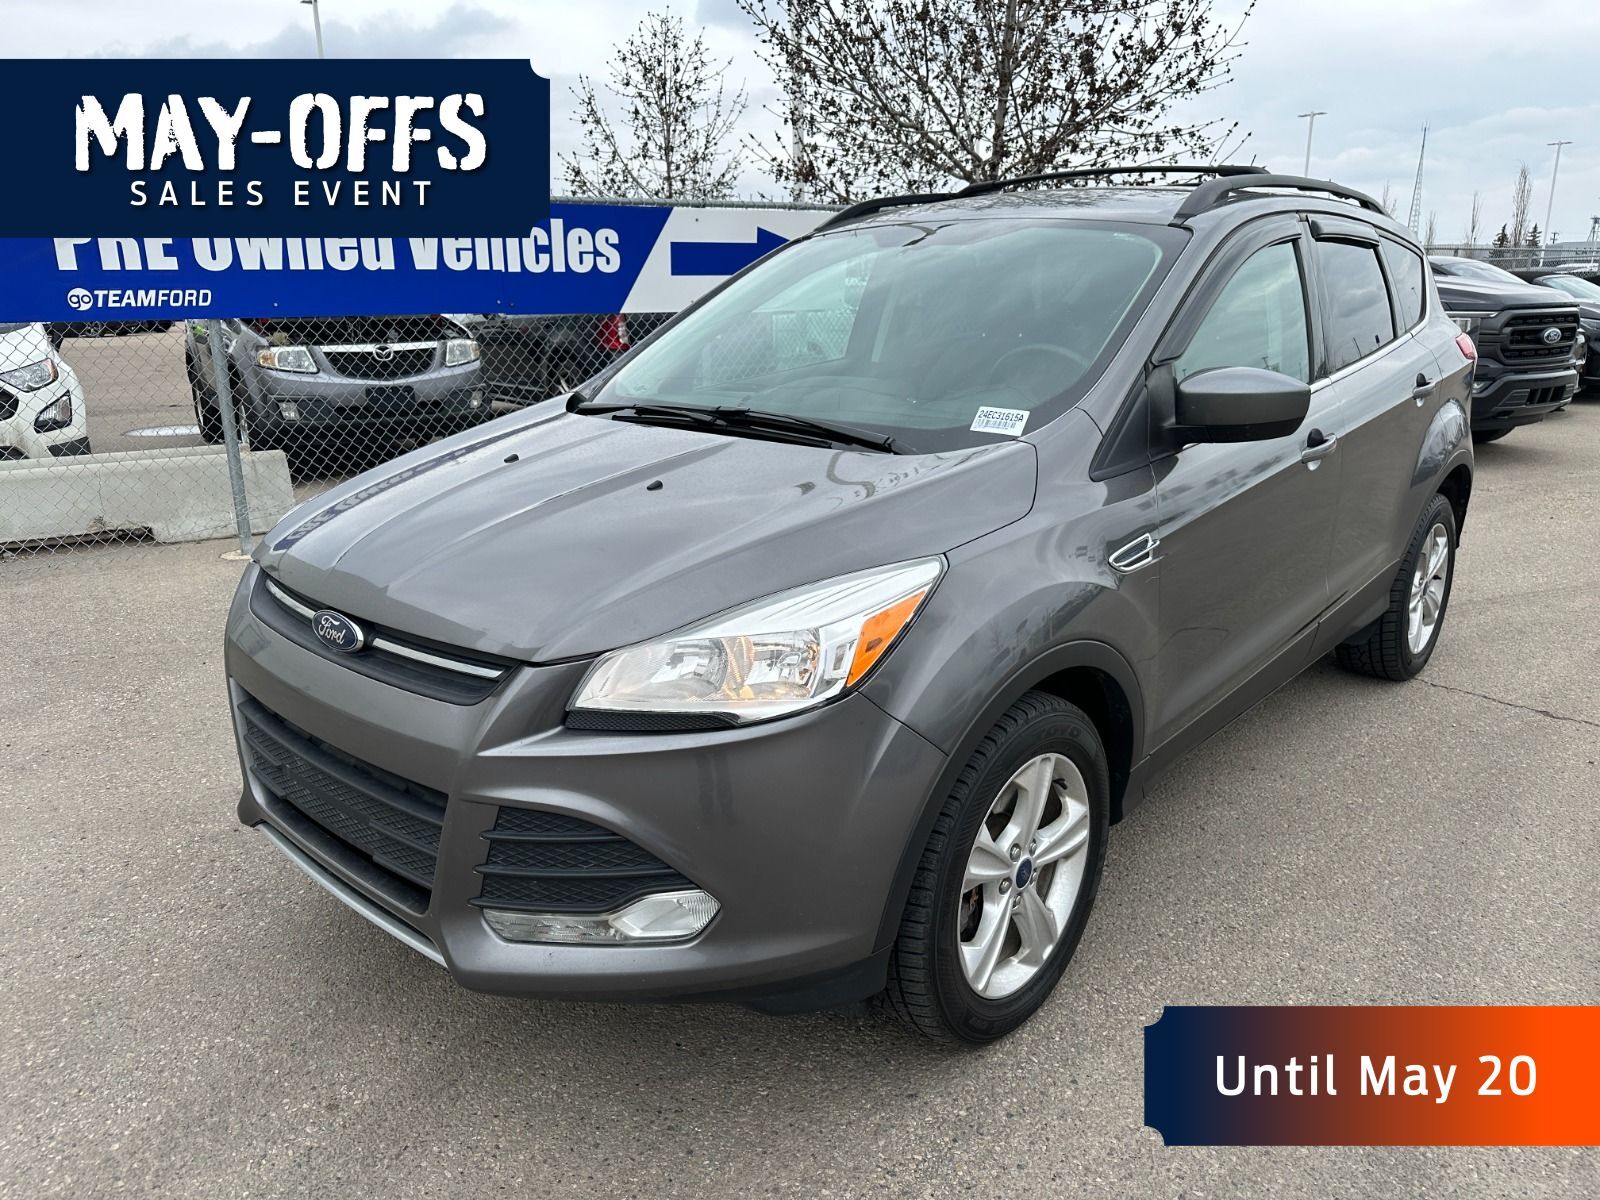 2013 Ford Escape 1.6L ECOBOOST ENG, SE, FORDPASS, KEYLESS ENTRY, RO